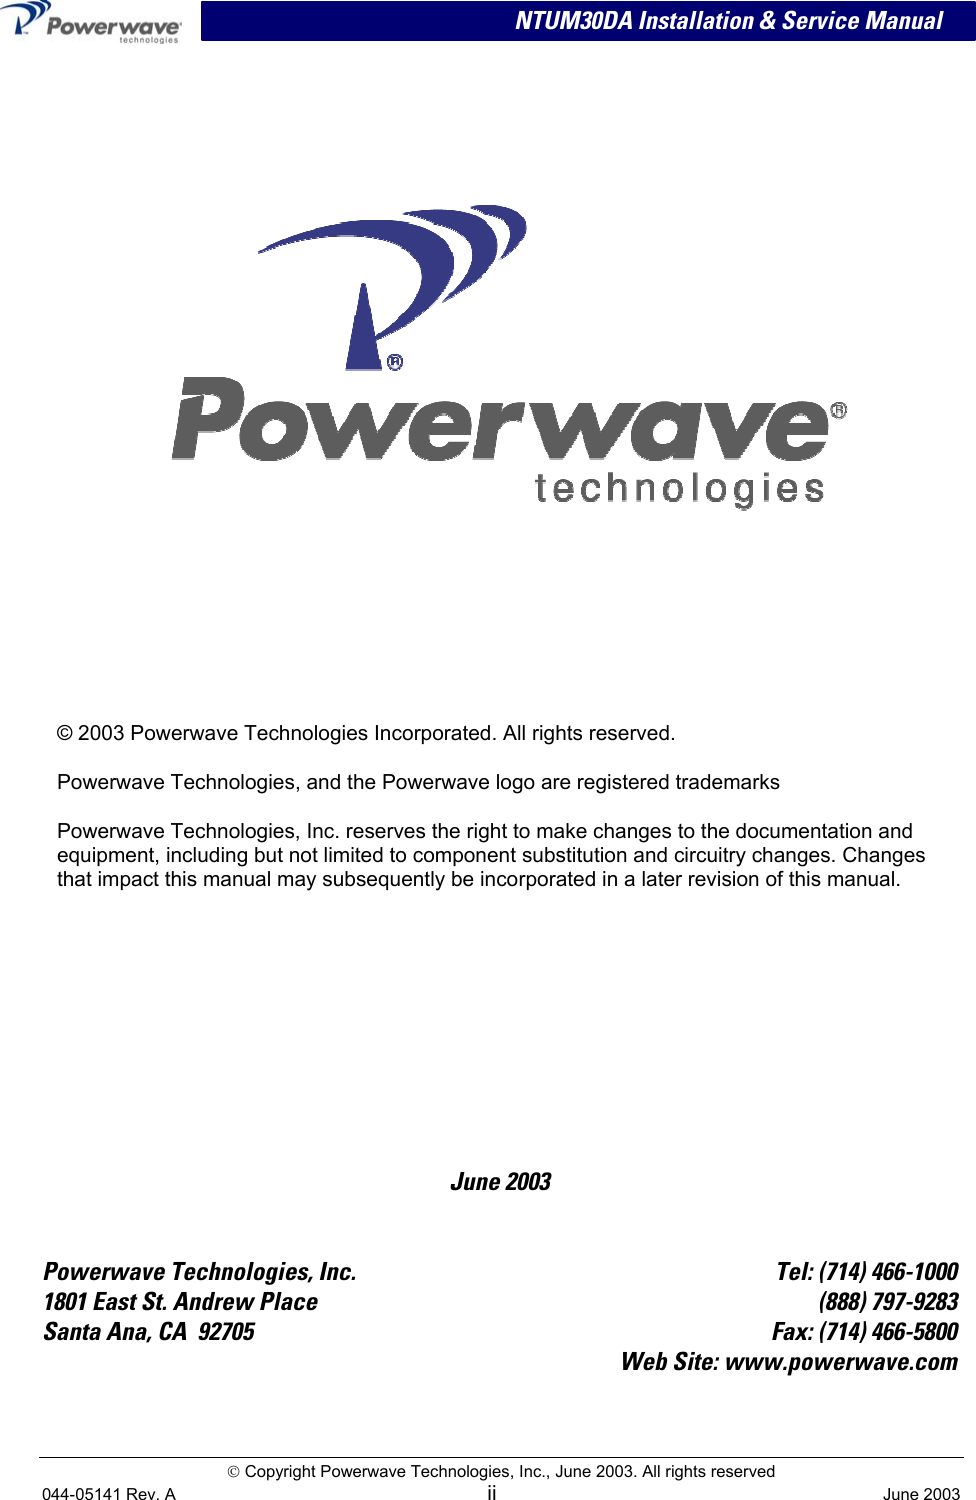                            NTUM30DA Installation &amp; Service Manual  Copyright Powerwave Technologies, Inc., June 2003. All rights reserved    June 2003     © 2003 Powerwave Technologies Incorporated. All rights reserved. Powerwave Technologies, and the Powerwave logo are registered trademarks Powerwave Technologies, Inc. reserves the right to make changes to the documentation and equipment, including but not limited to component substitution and circuitry changes. Changes that impact this manual may subsequently be incorporated in a later revision of this manual.   Powerwave Technologies, Inc.  Tel: (714) 466-1000 1801 East St. Andrew Place  (888) 797-9283 Santa Ana, CA  92705  Fax: (714) 466-5800  Web Site: www.powerwave.com  044-05141 Rev. A ii  June 2003 